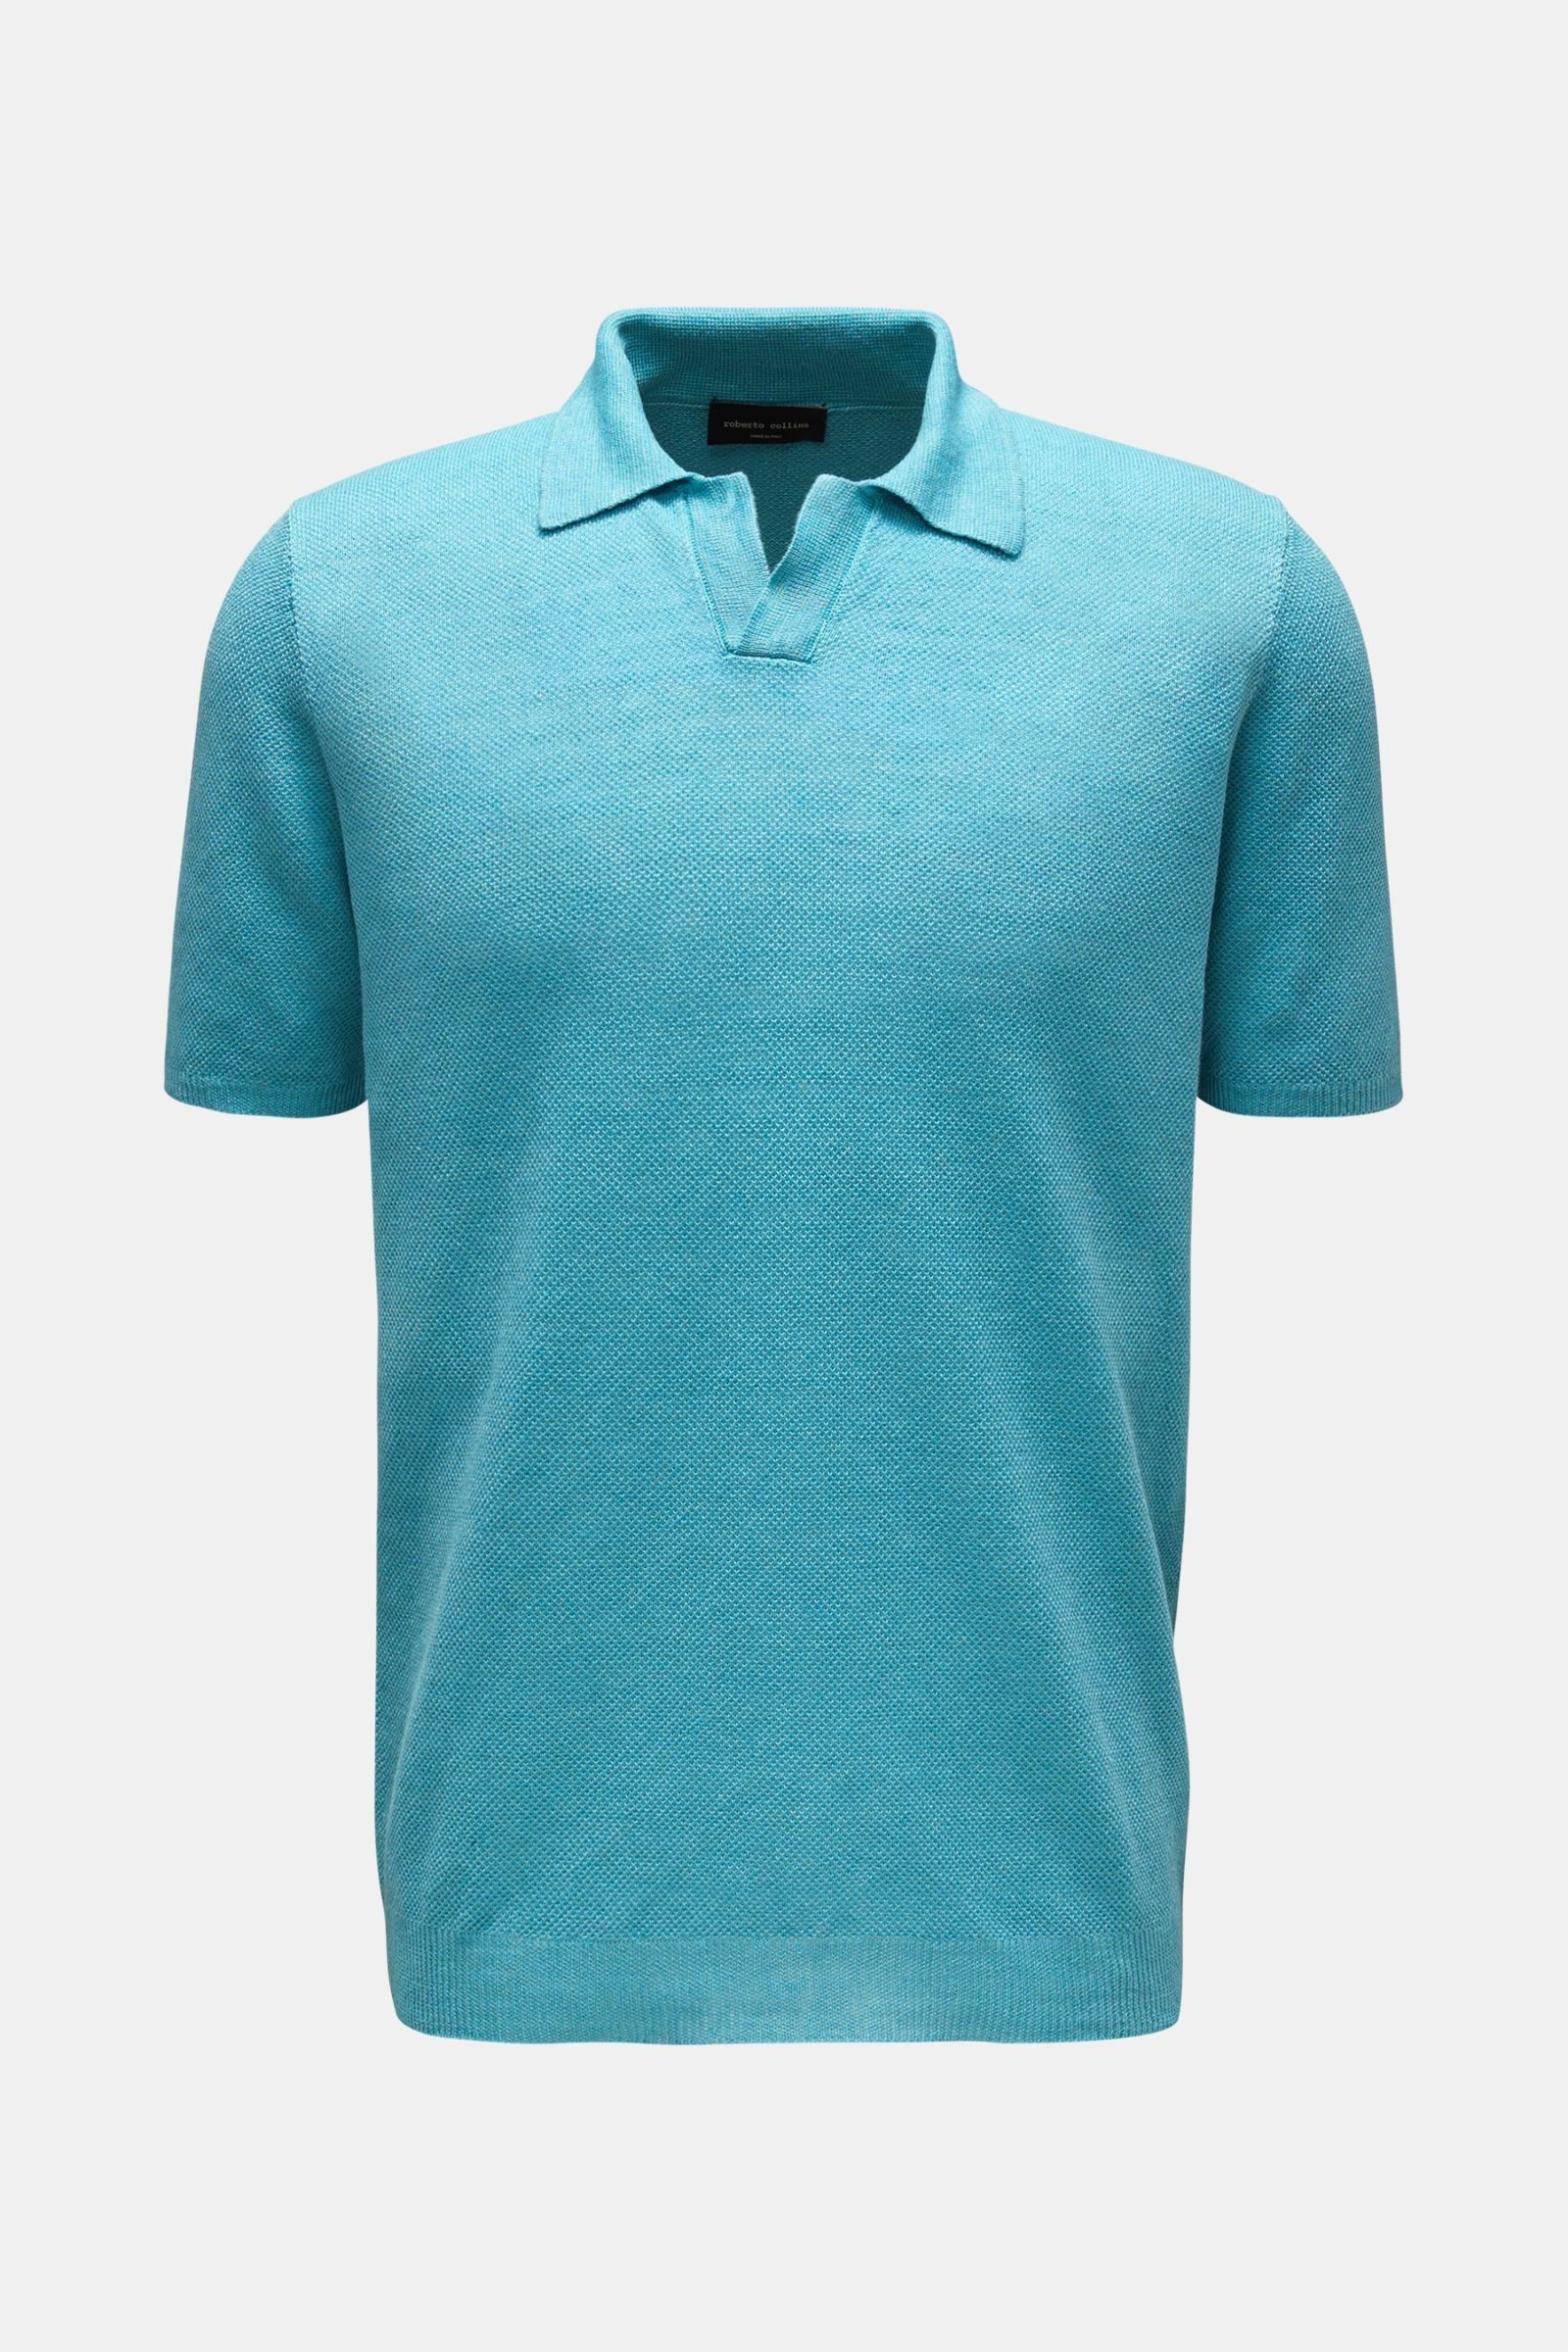 Linen short sleeve knit polo turquoise